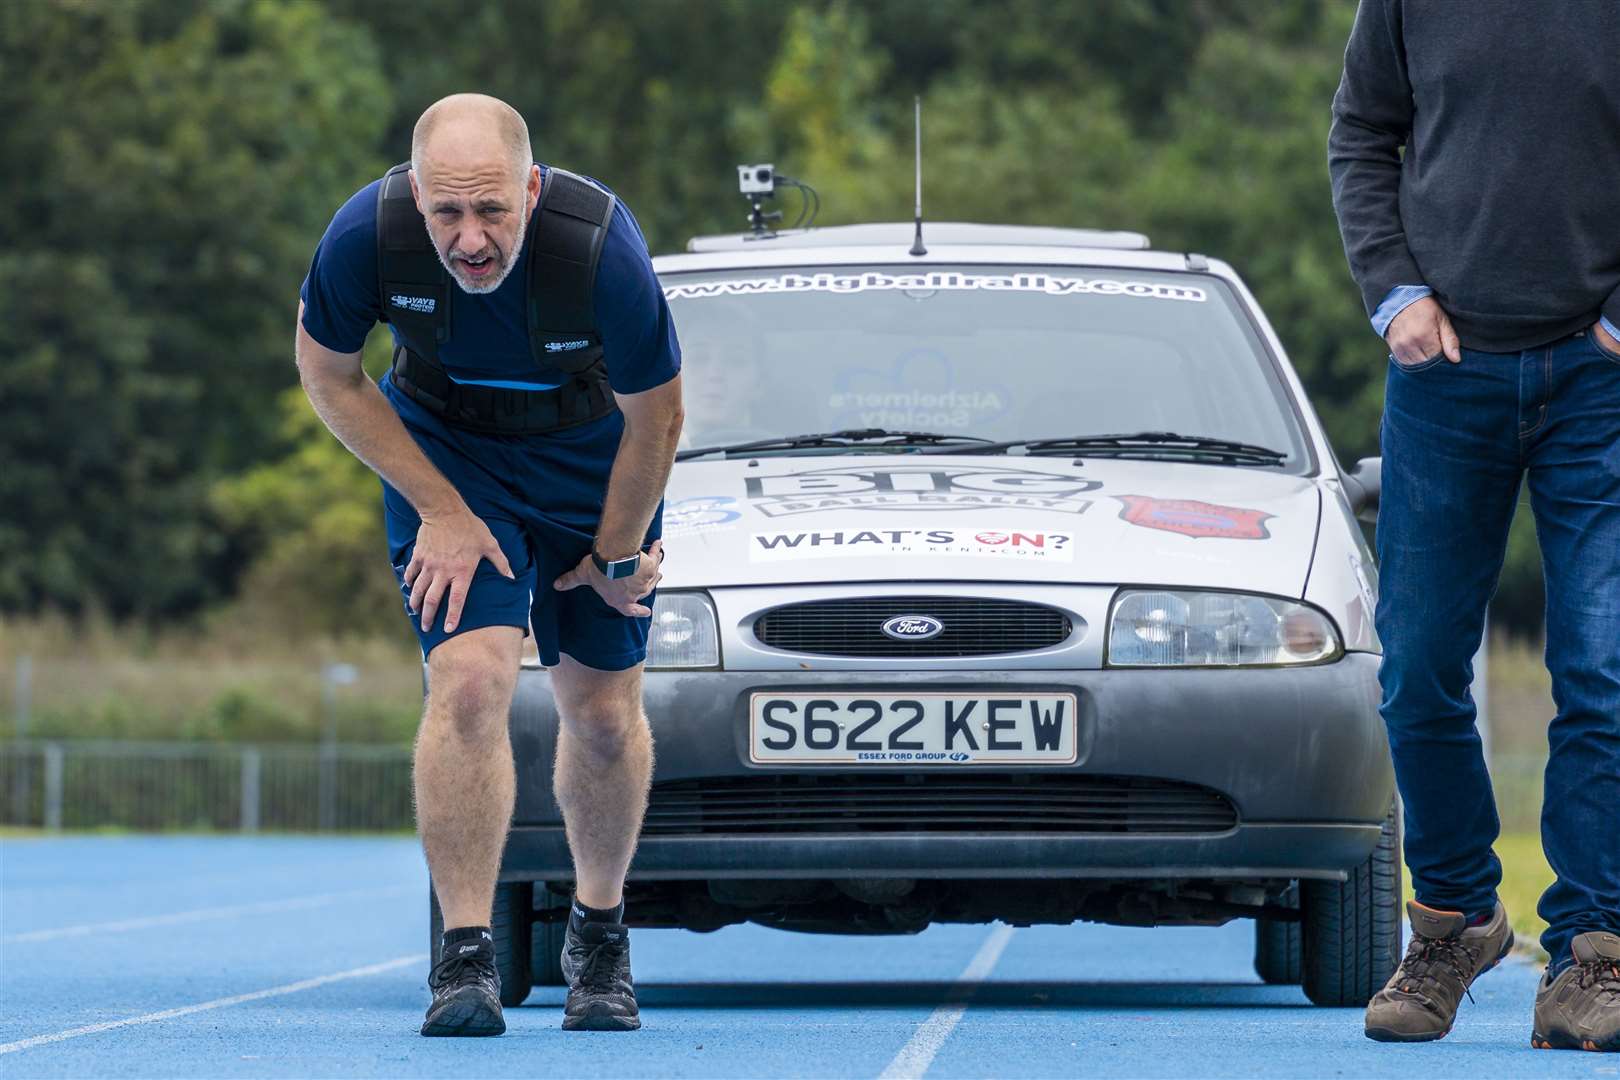 Dave Cooke pulled a car around Dartford Central Park Athletics Track over the equivalent of a half marathon distance. Photo: Ian Cooke/ ICookeImages